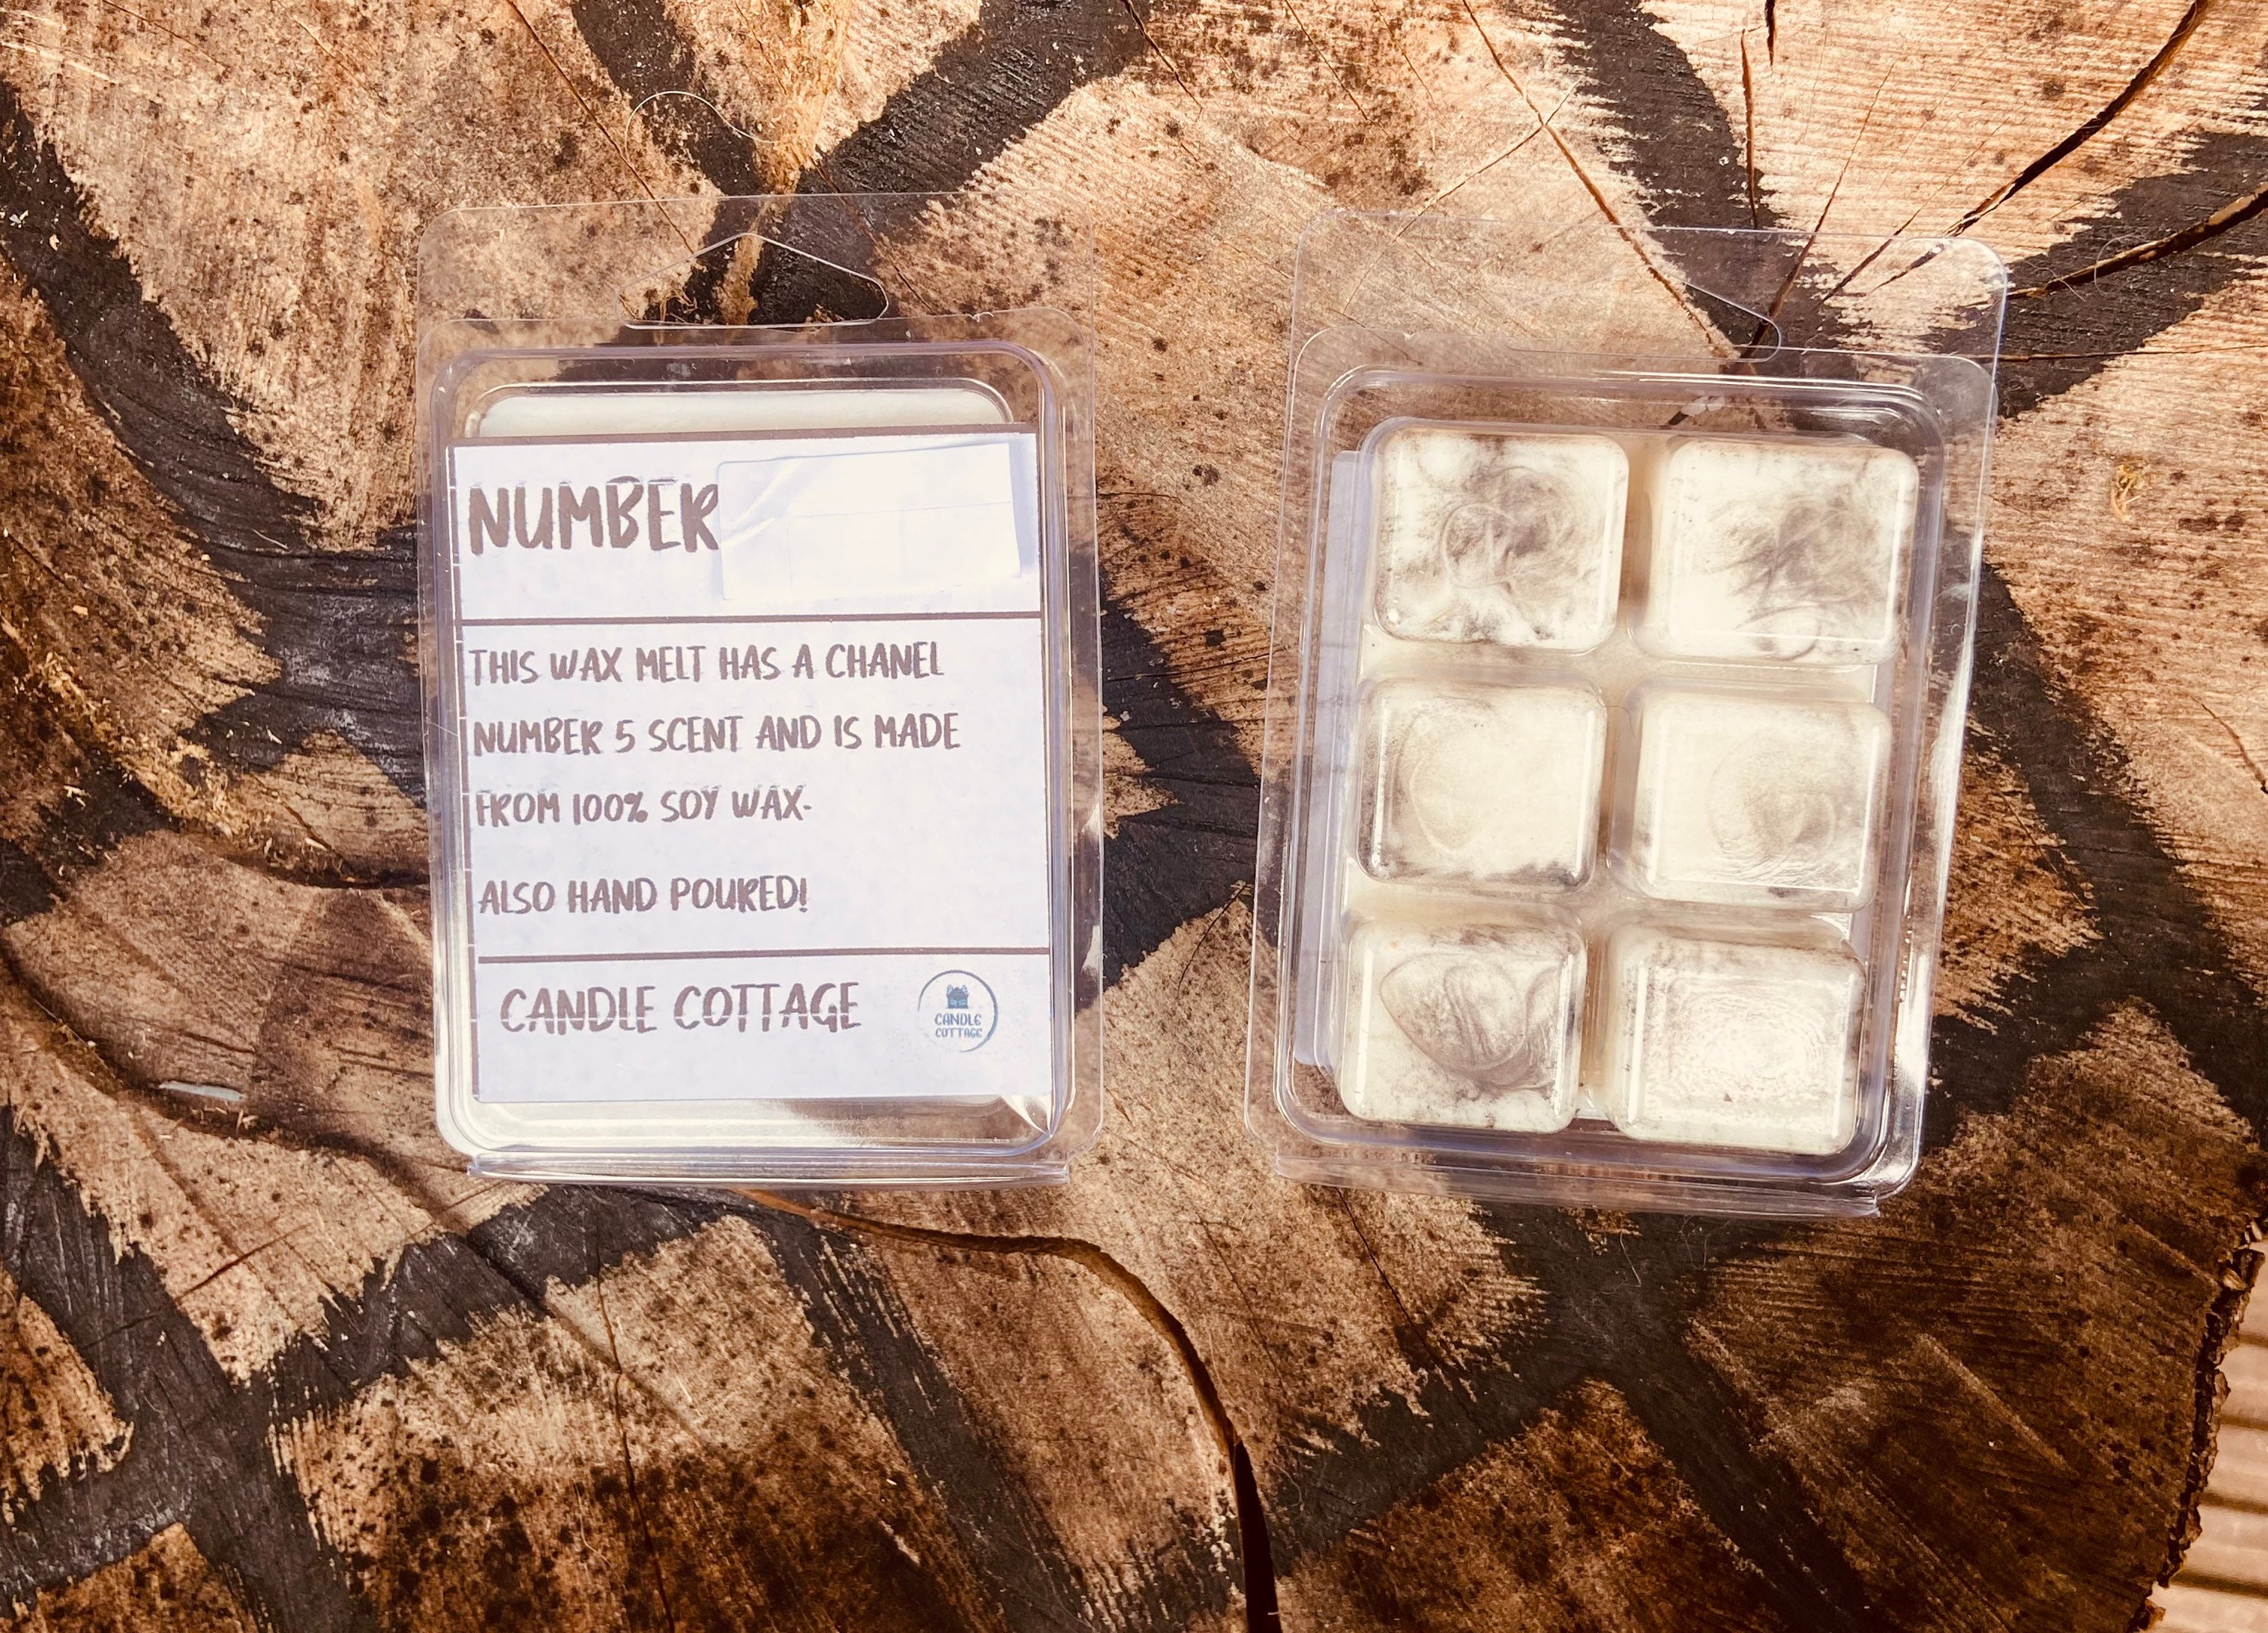 Chanel No. 5 Inspired Scented Gel Melts™ for warmers 3 pack [479